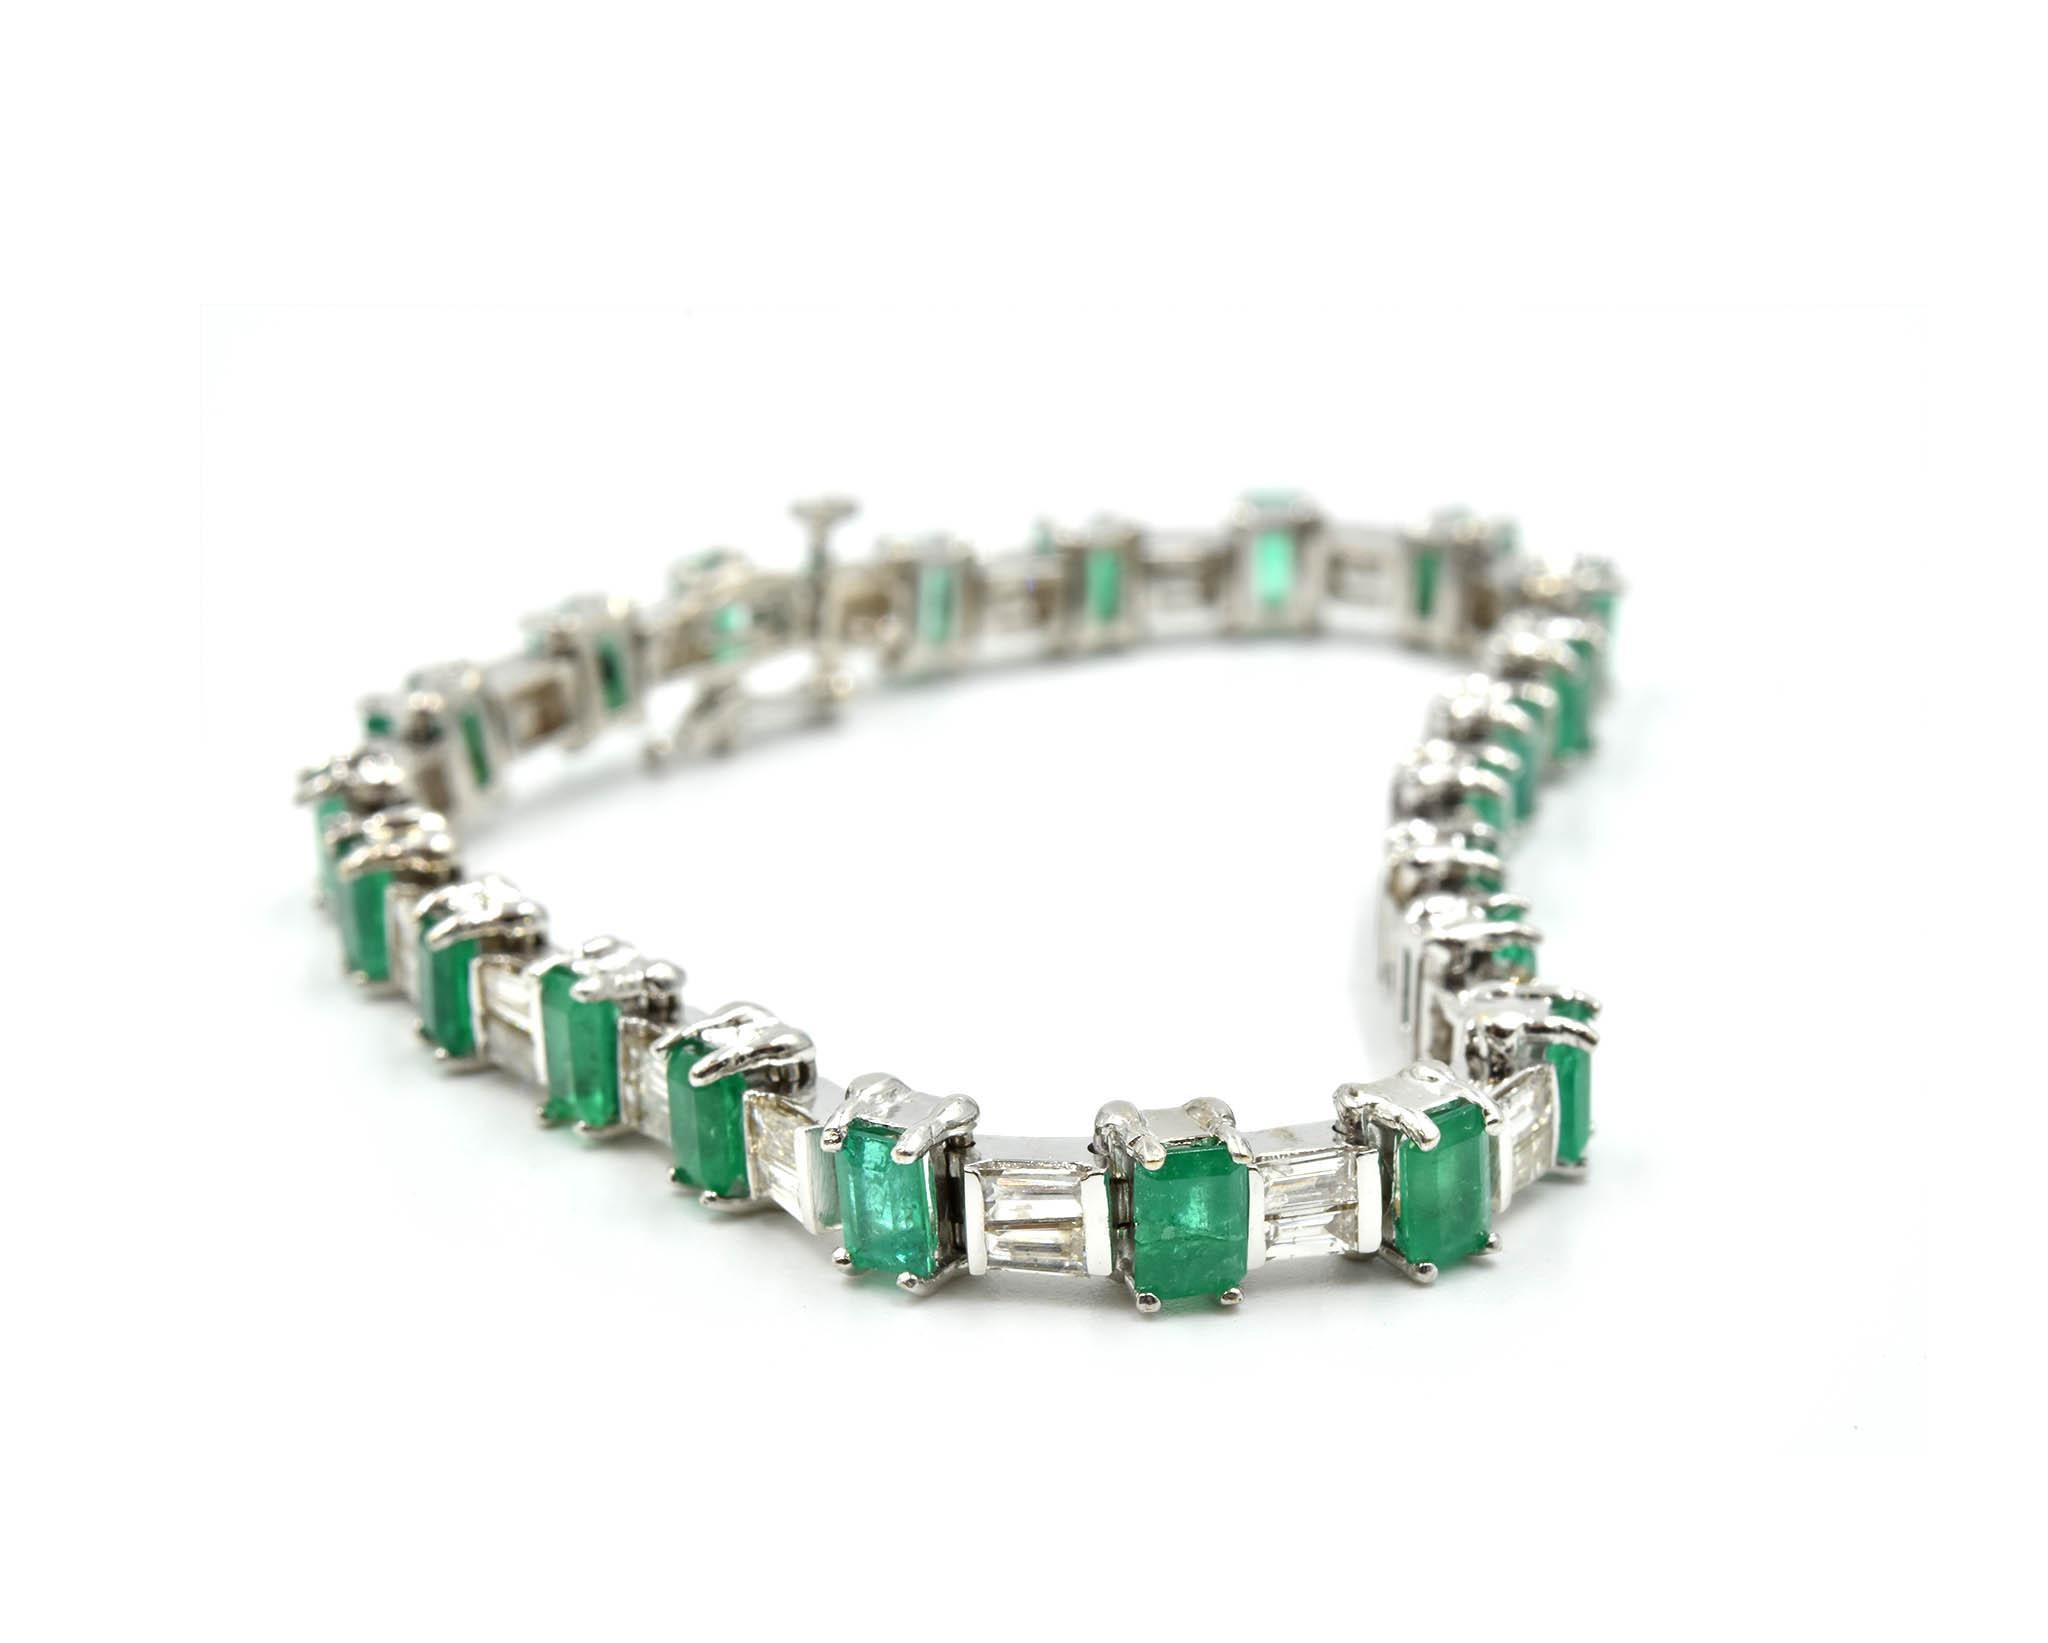 Designer: custom design
Material: 14k white gold
Emeralds: 22 emeralds = 7.70 carat total weight
Diamonds: 44 baguette cuts = 1.32 carat total weight
Dimensions: the bracelet measures 7-inches long and 1/4-inches wide
Weight: 20.08 grams
